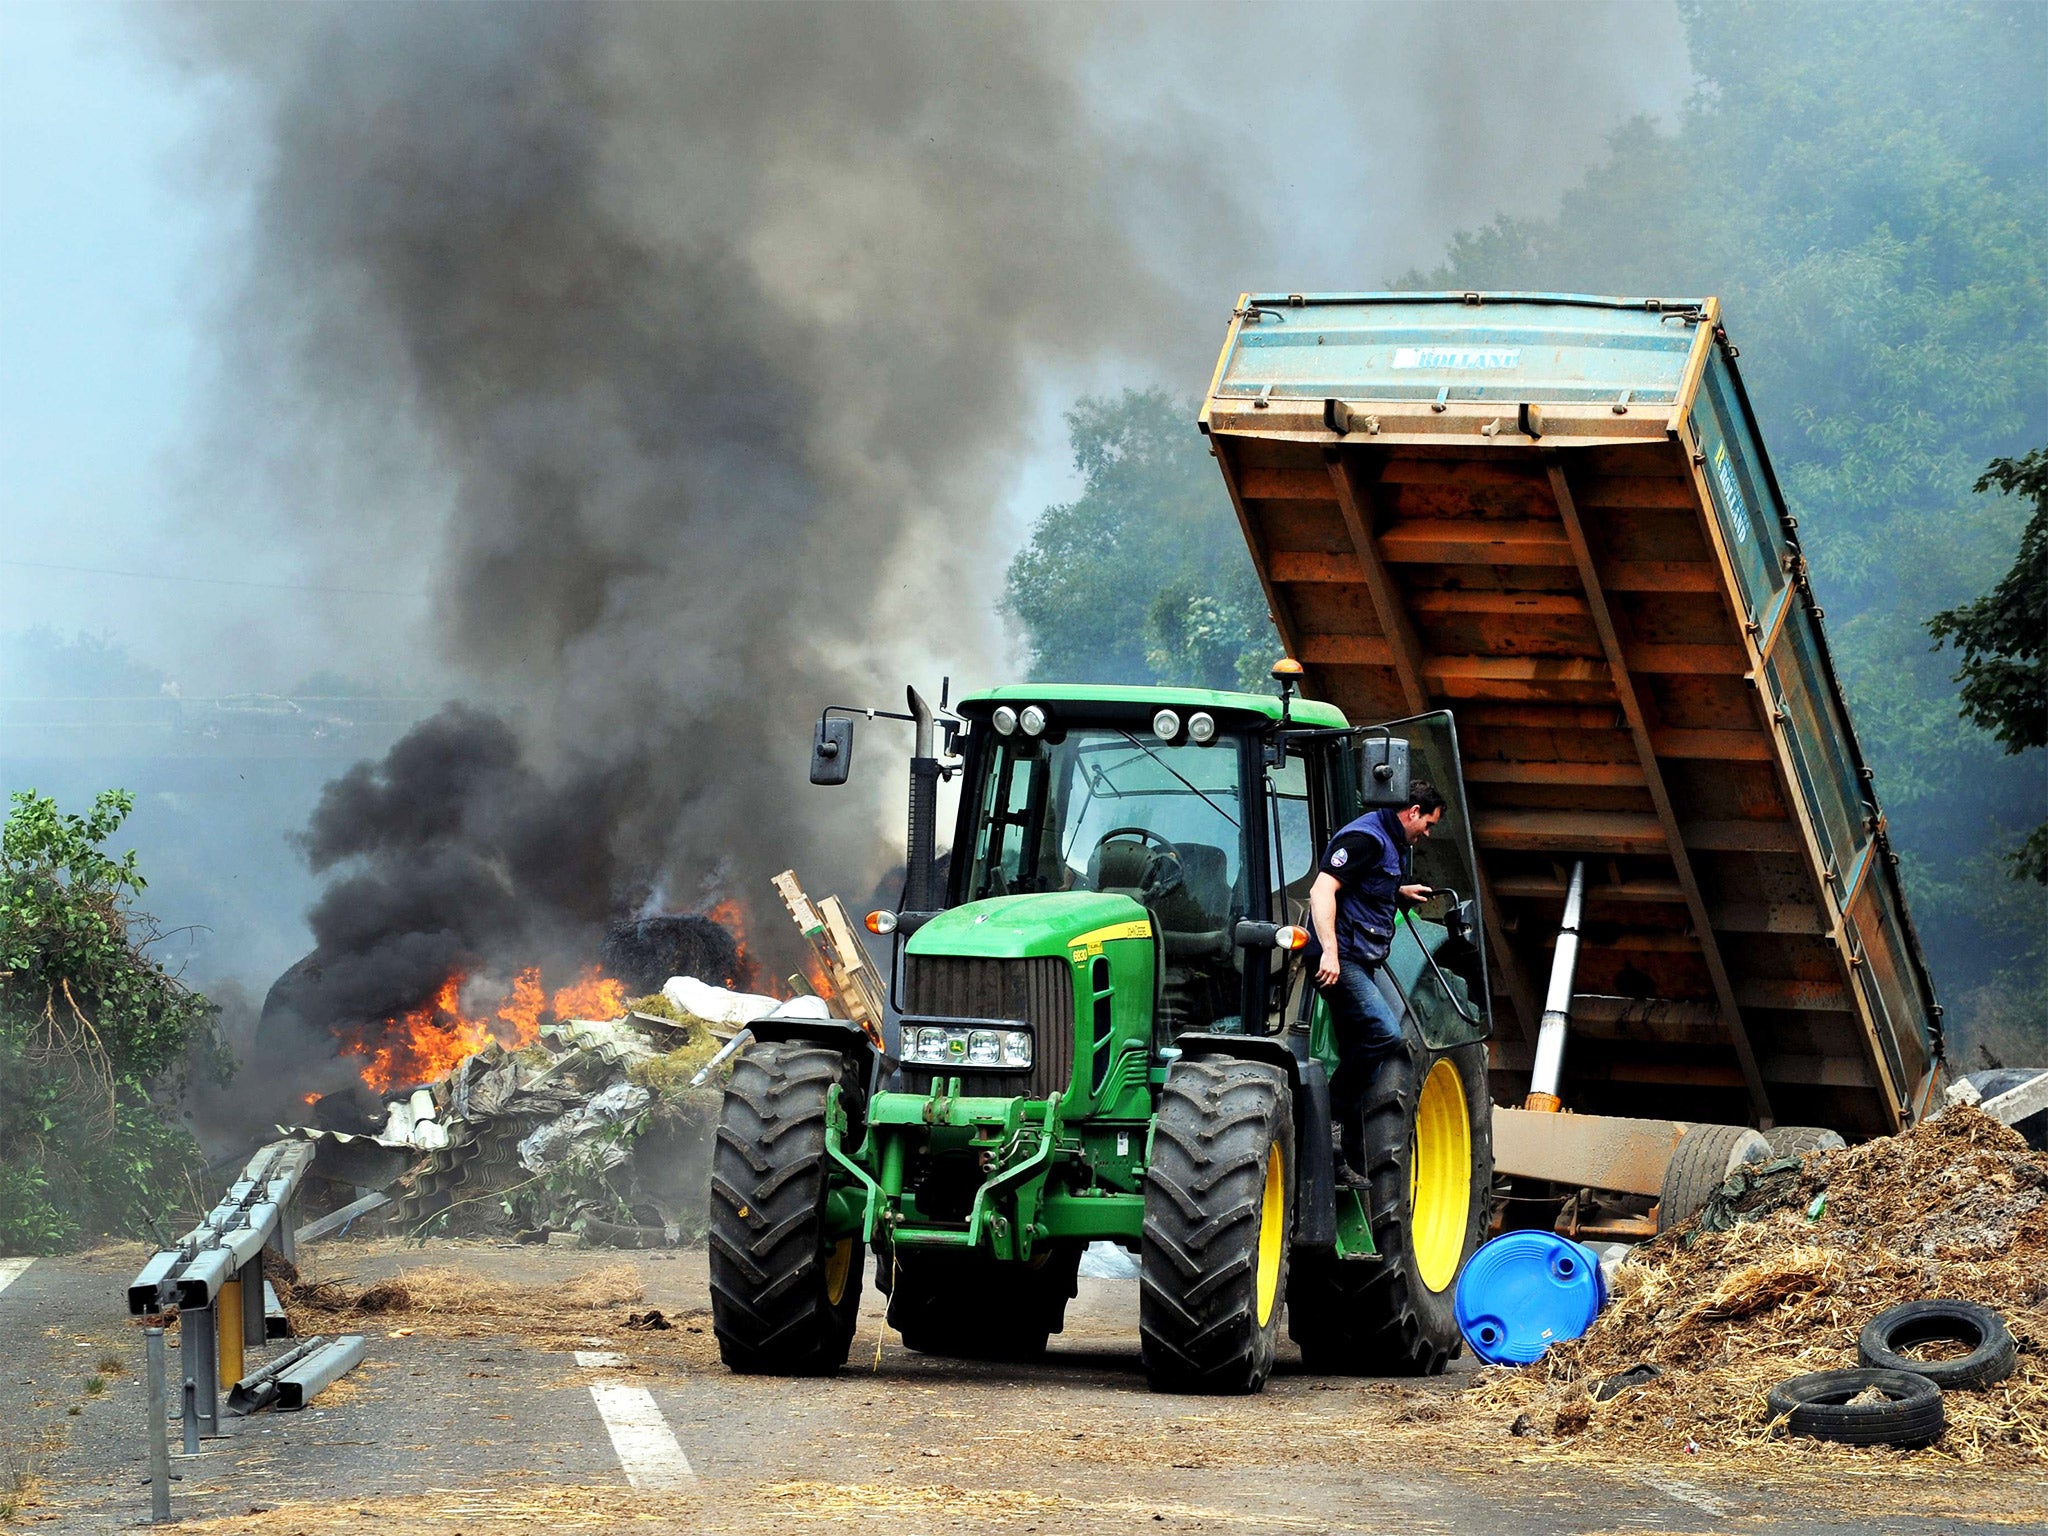 Farmers used a tractor, burning hay and tyres to block the highway between Morlaix and Brest in north-western France